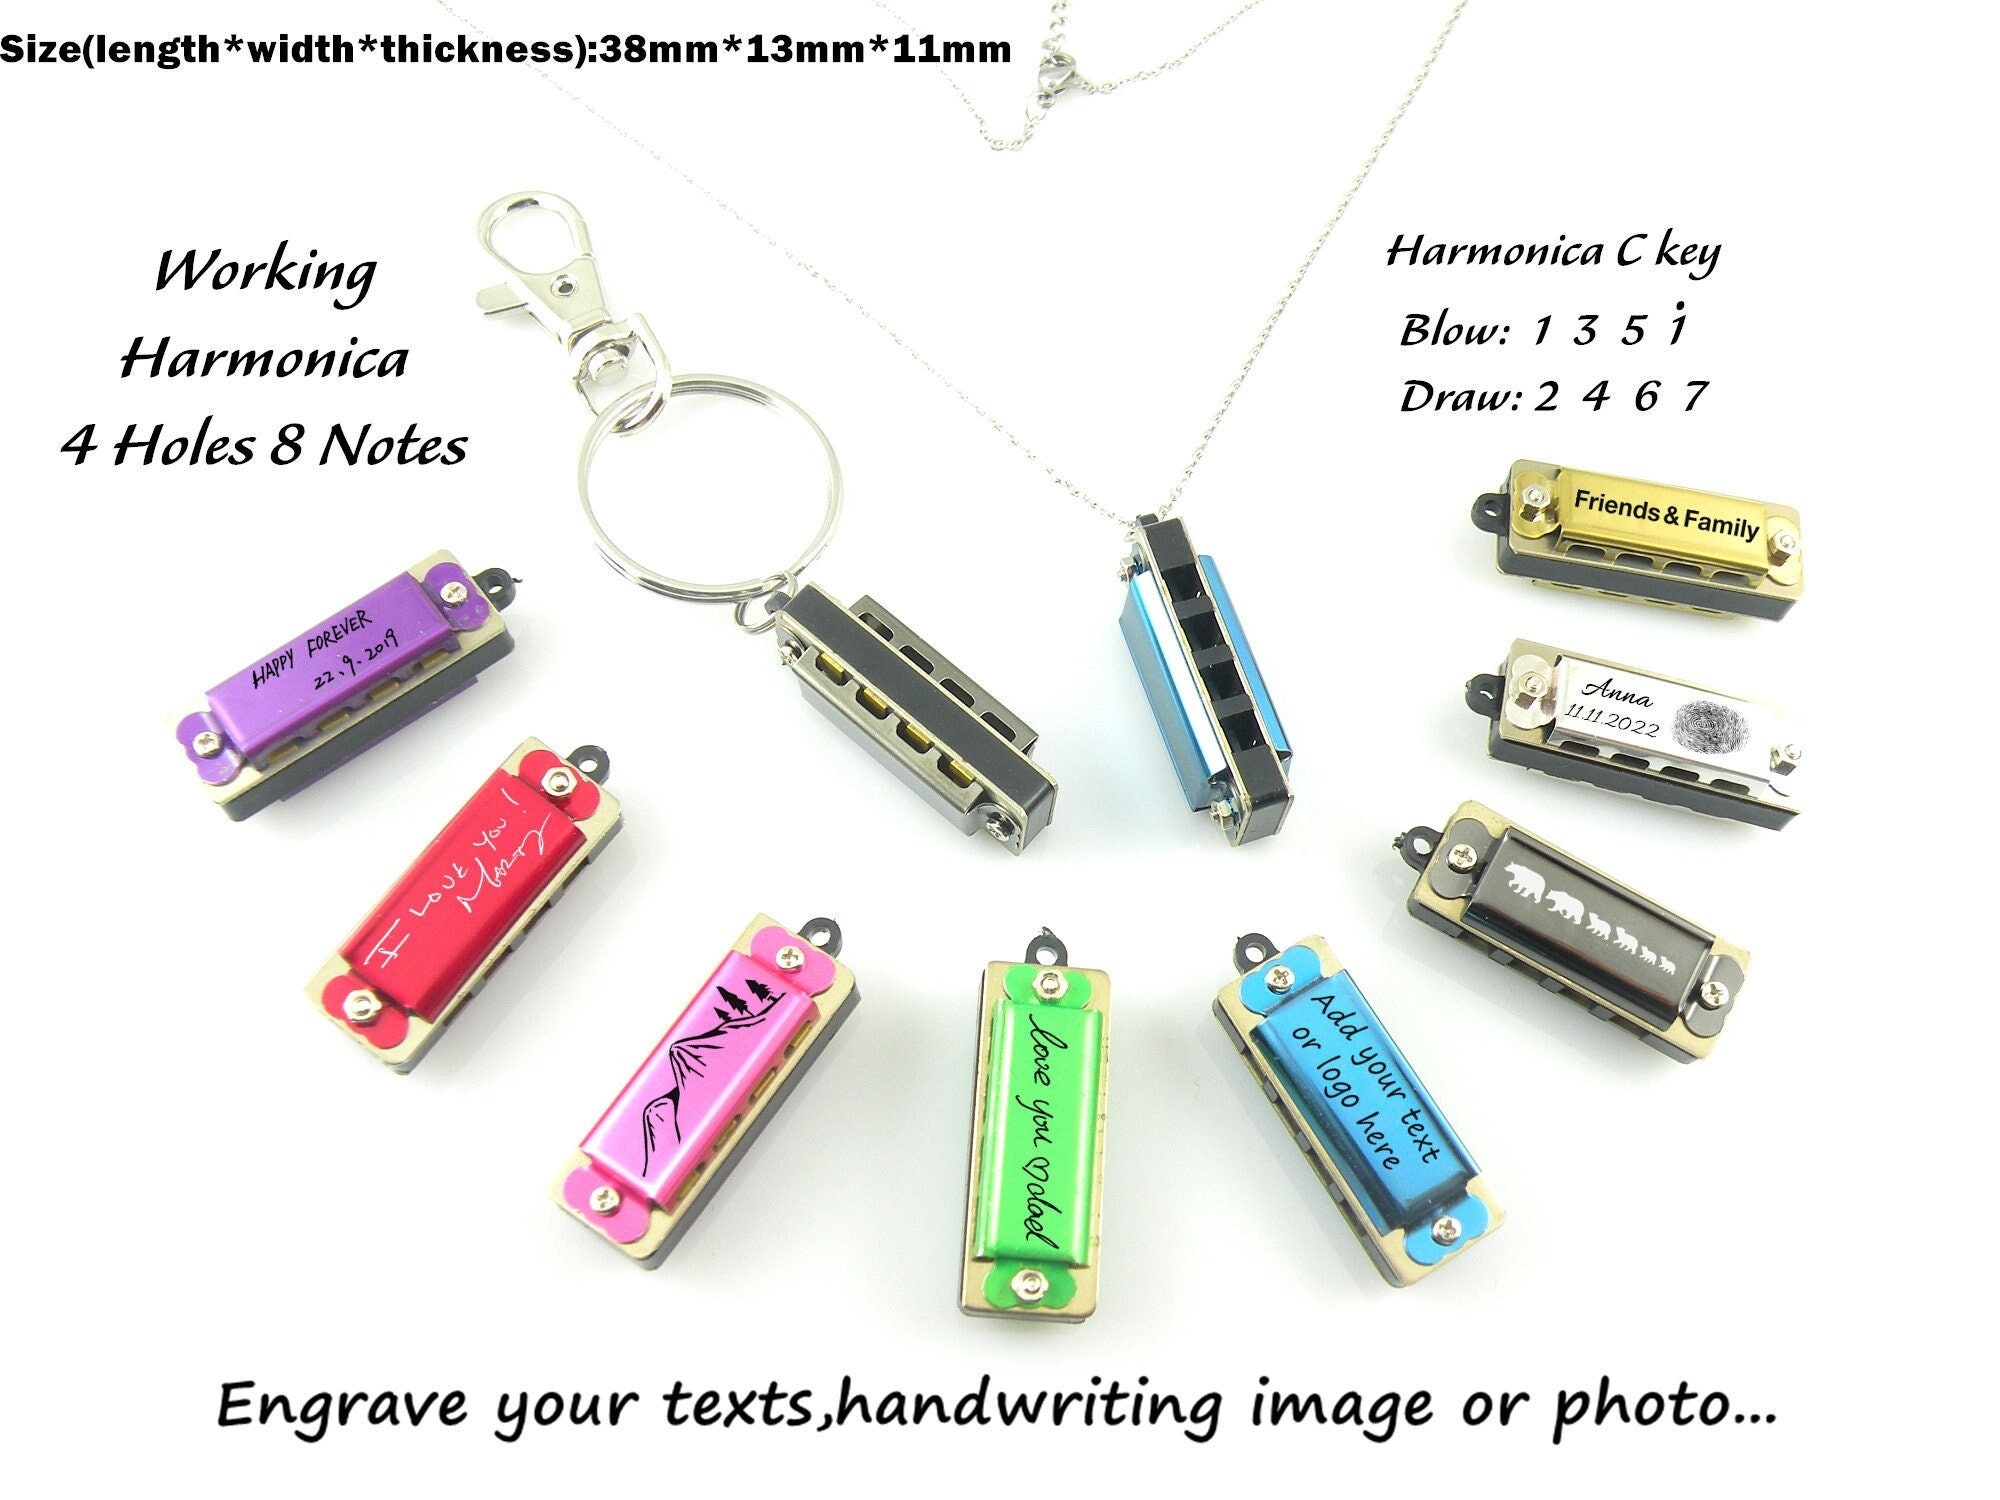 Get Custom, Personalized and Engraved Harmonicas - Harmonicaland